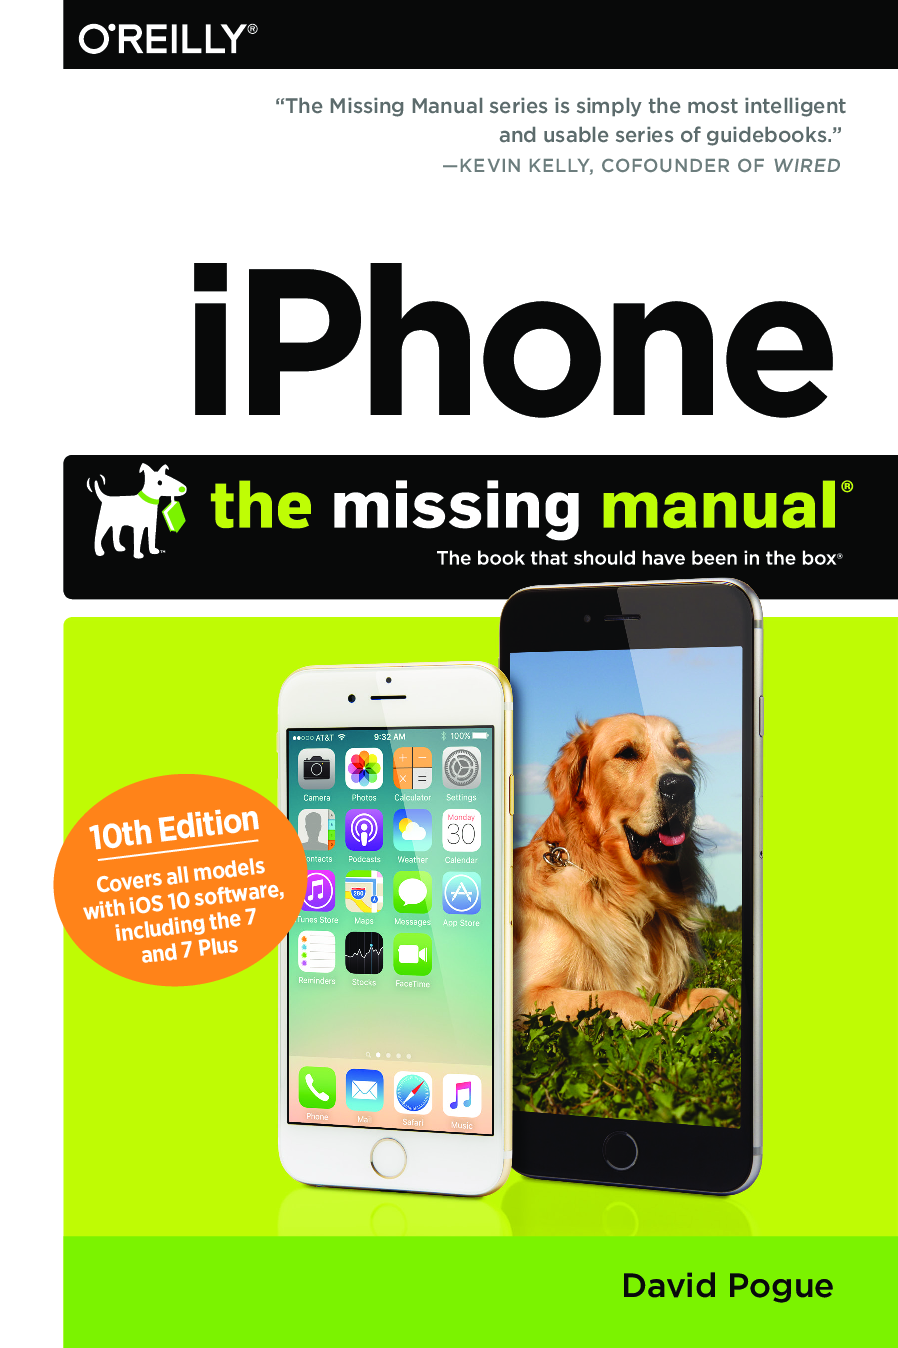 Iphone The Missing Manual 10th Edition 20170112 Oreilly I Phone The Missing Manual 10th Edition